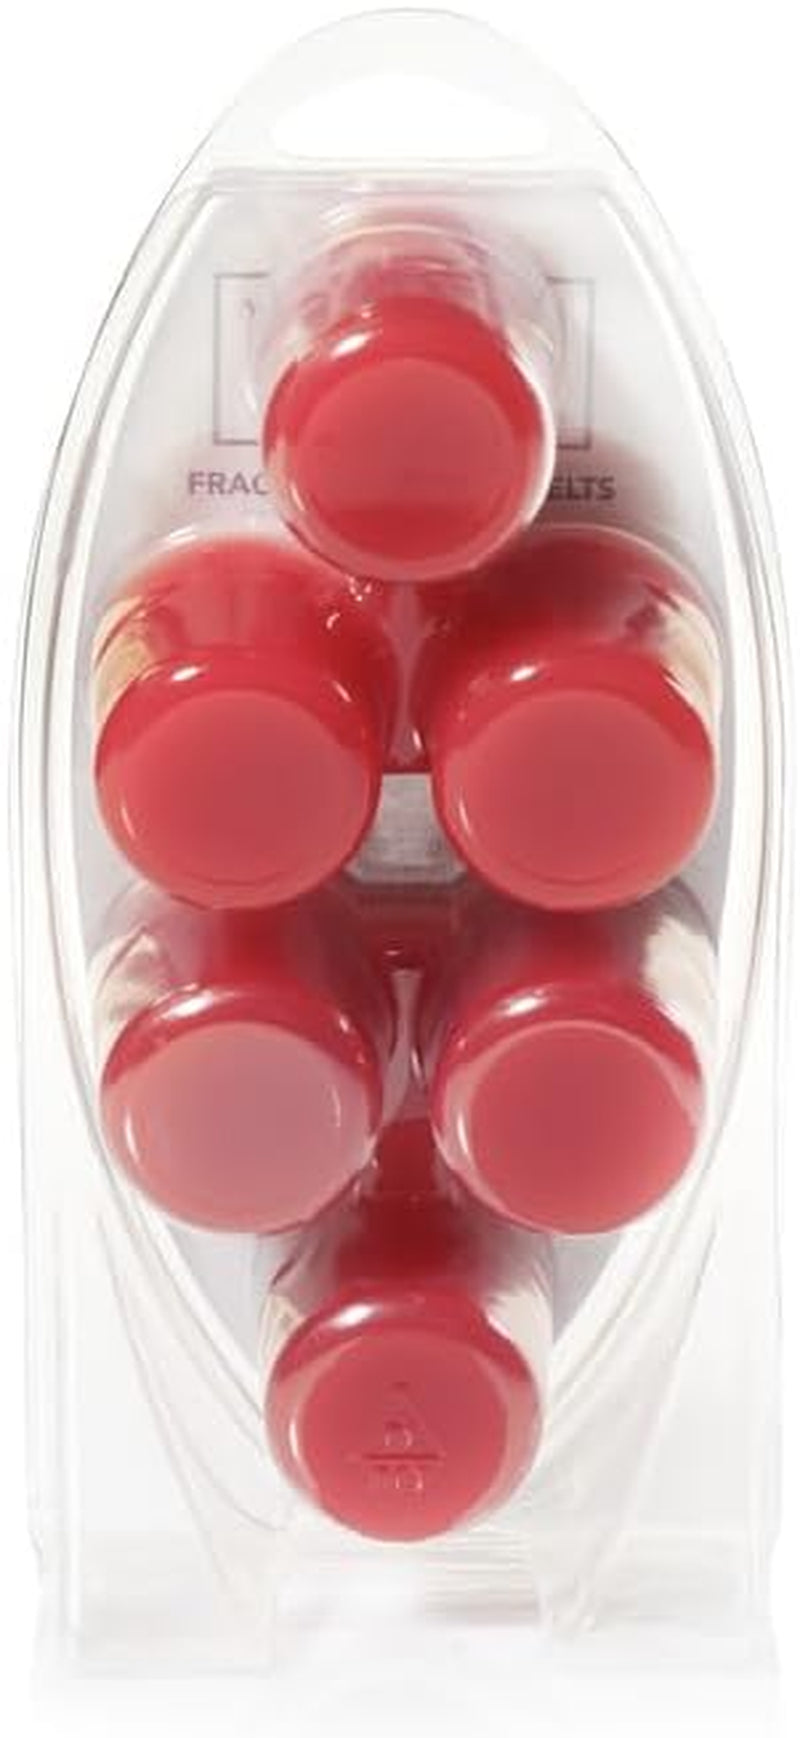 Yankee Candle Home Sweet Home Wax Melts, 3 Packs of 6 (18 Total)  Yankee Candle Company   